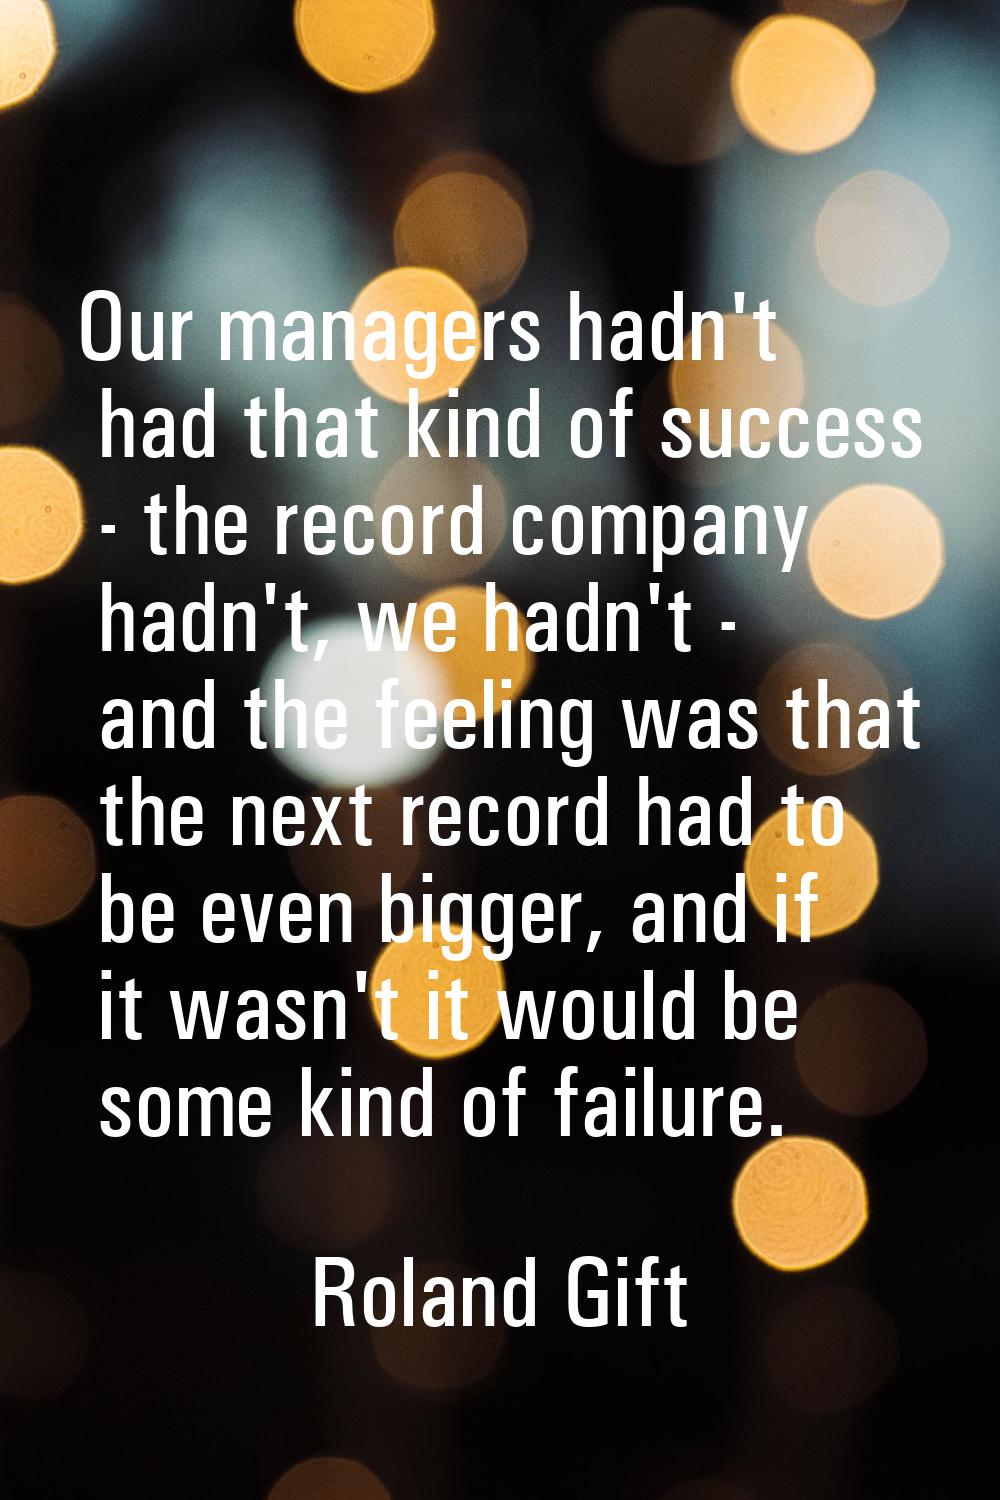 Our managers hadn't had that kind of success - the record company hadn't, we hadn't - and the feeli